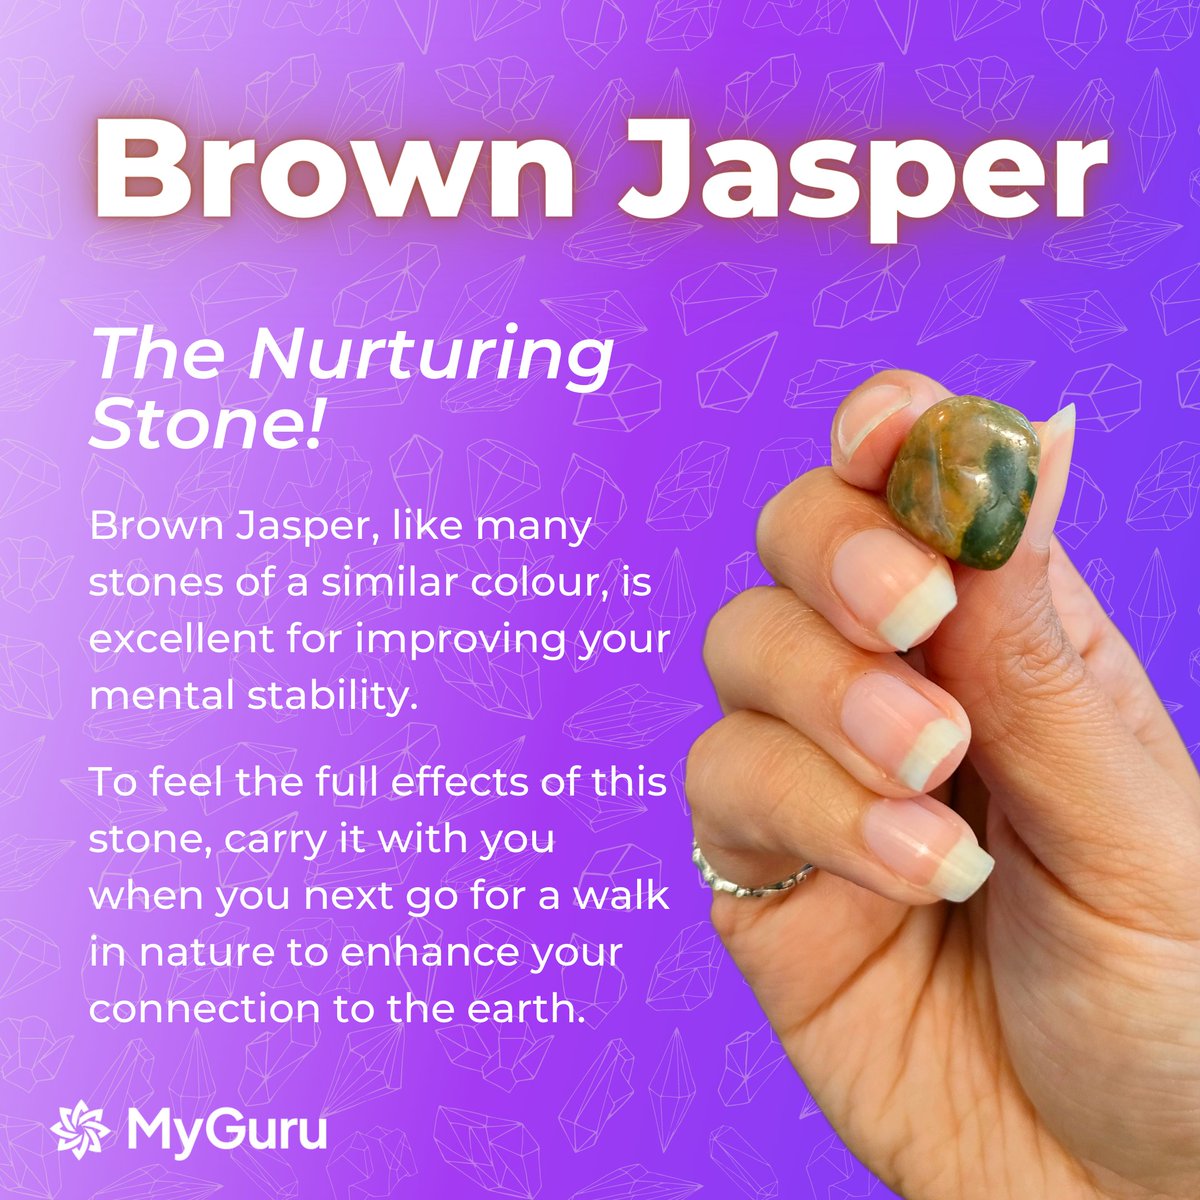 🤎Brown Jasper is perfect for bringing you back down to earth...literally! Swipe to learn more ➡️

#myguru #foryou #foryoupage #fypage #fy #trends #crystalmagic #crystalvibes #crystalenergy #gemstone #gemstones #crystalsuk #crystals #crystal #fyp #jasper #jasperstone #brownjasper